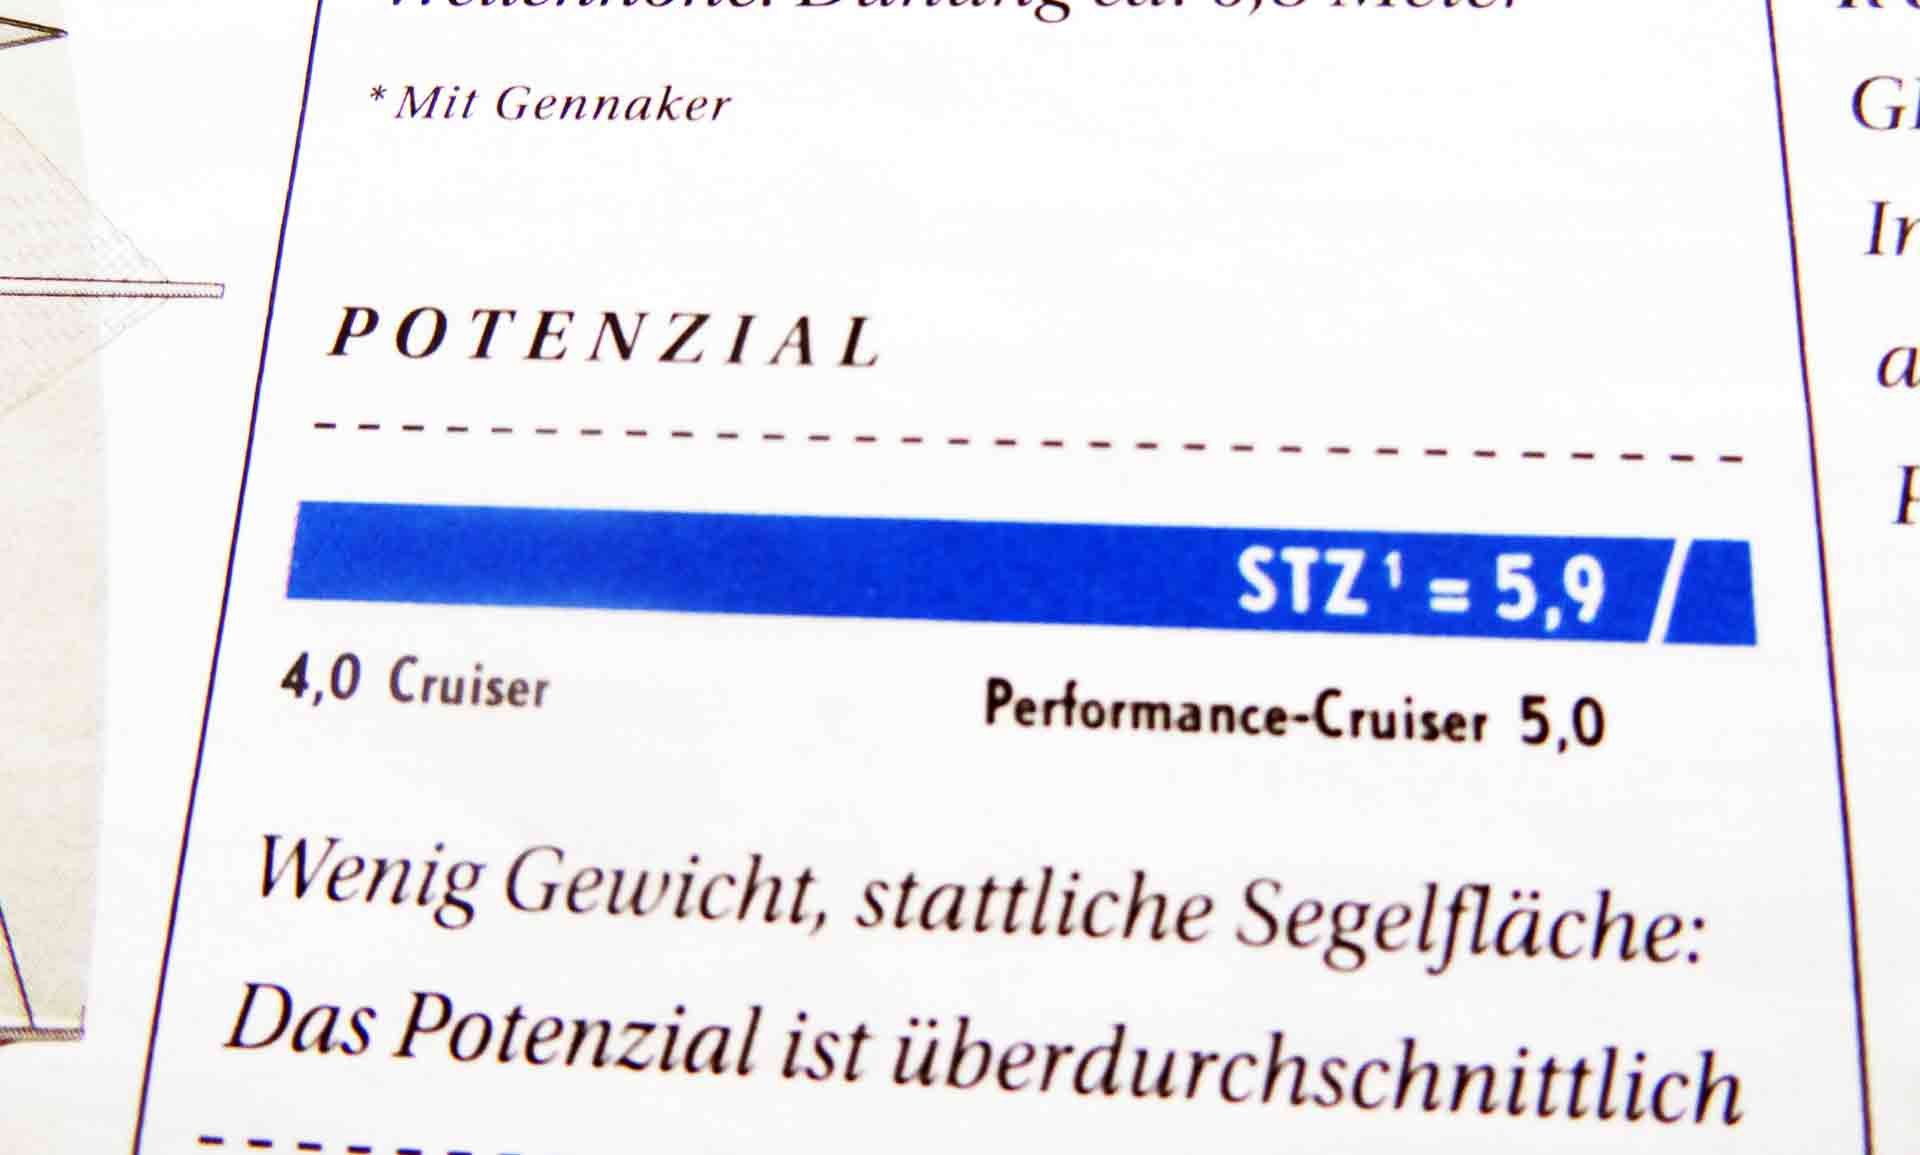 SA/D - STZ in German - in a yachting magazine´s boat review